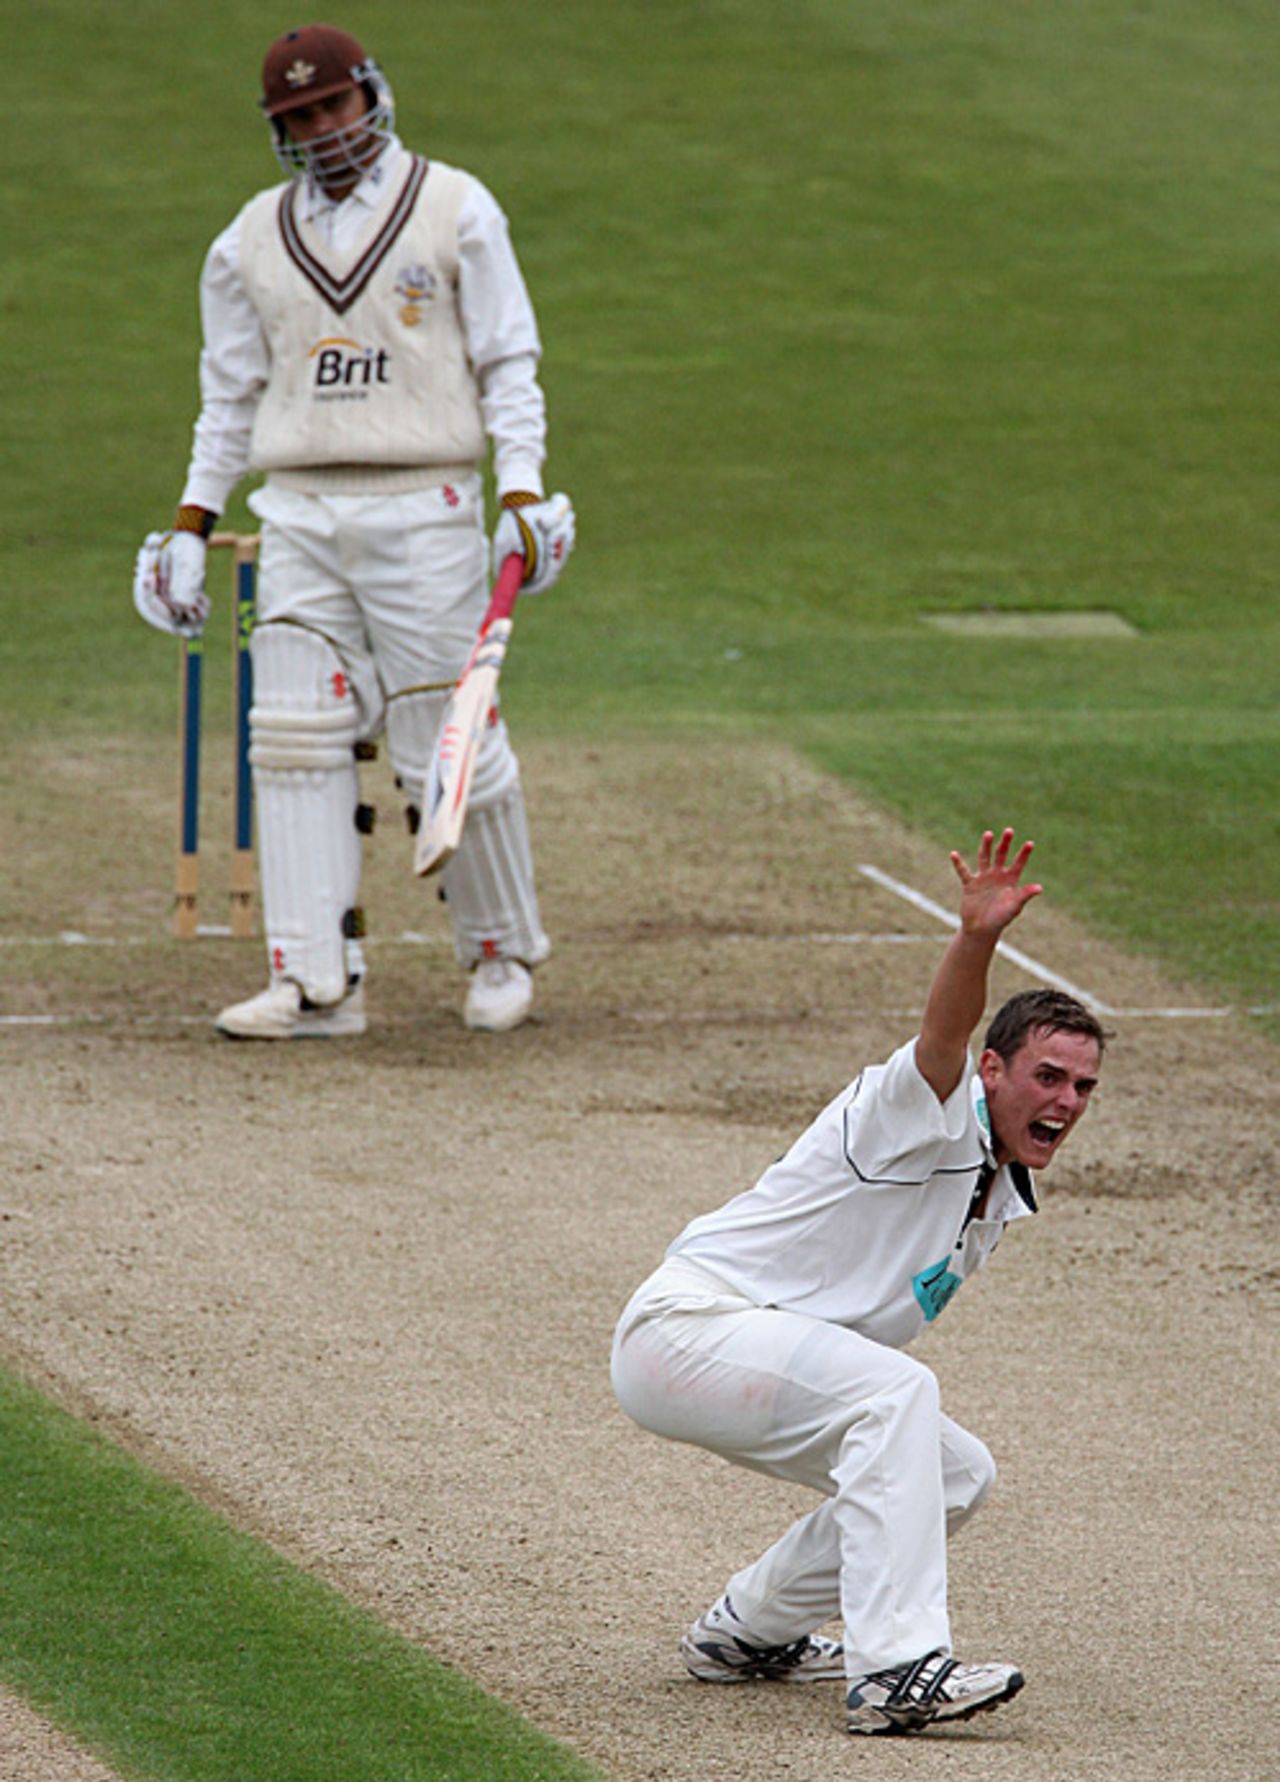 David Griffiths roars an unsuccessful appeal for Mark Ramprakash's wicket, Hampshire v Surrey, Southampton, August 30, 2007